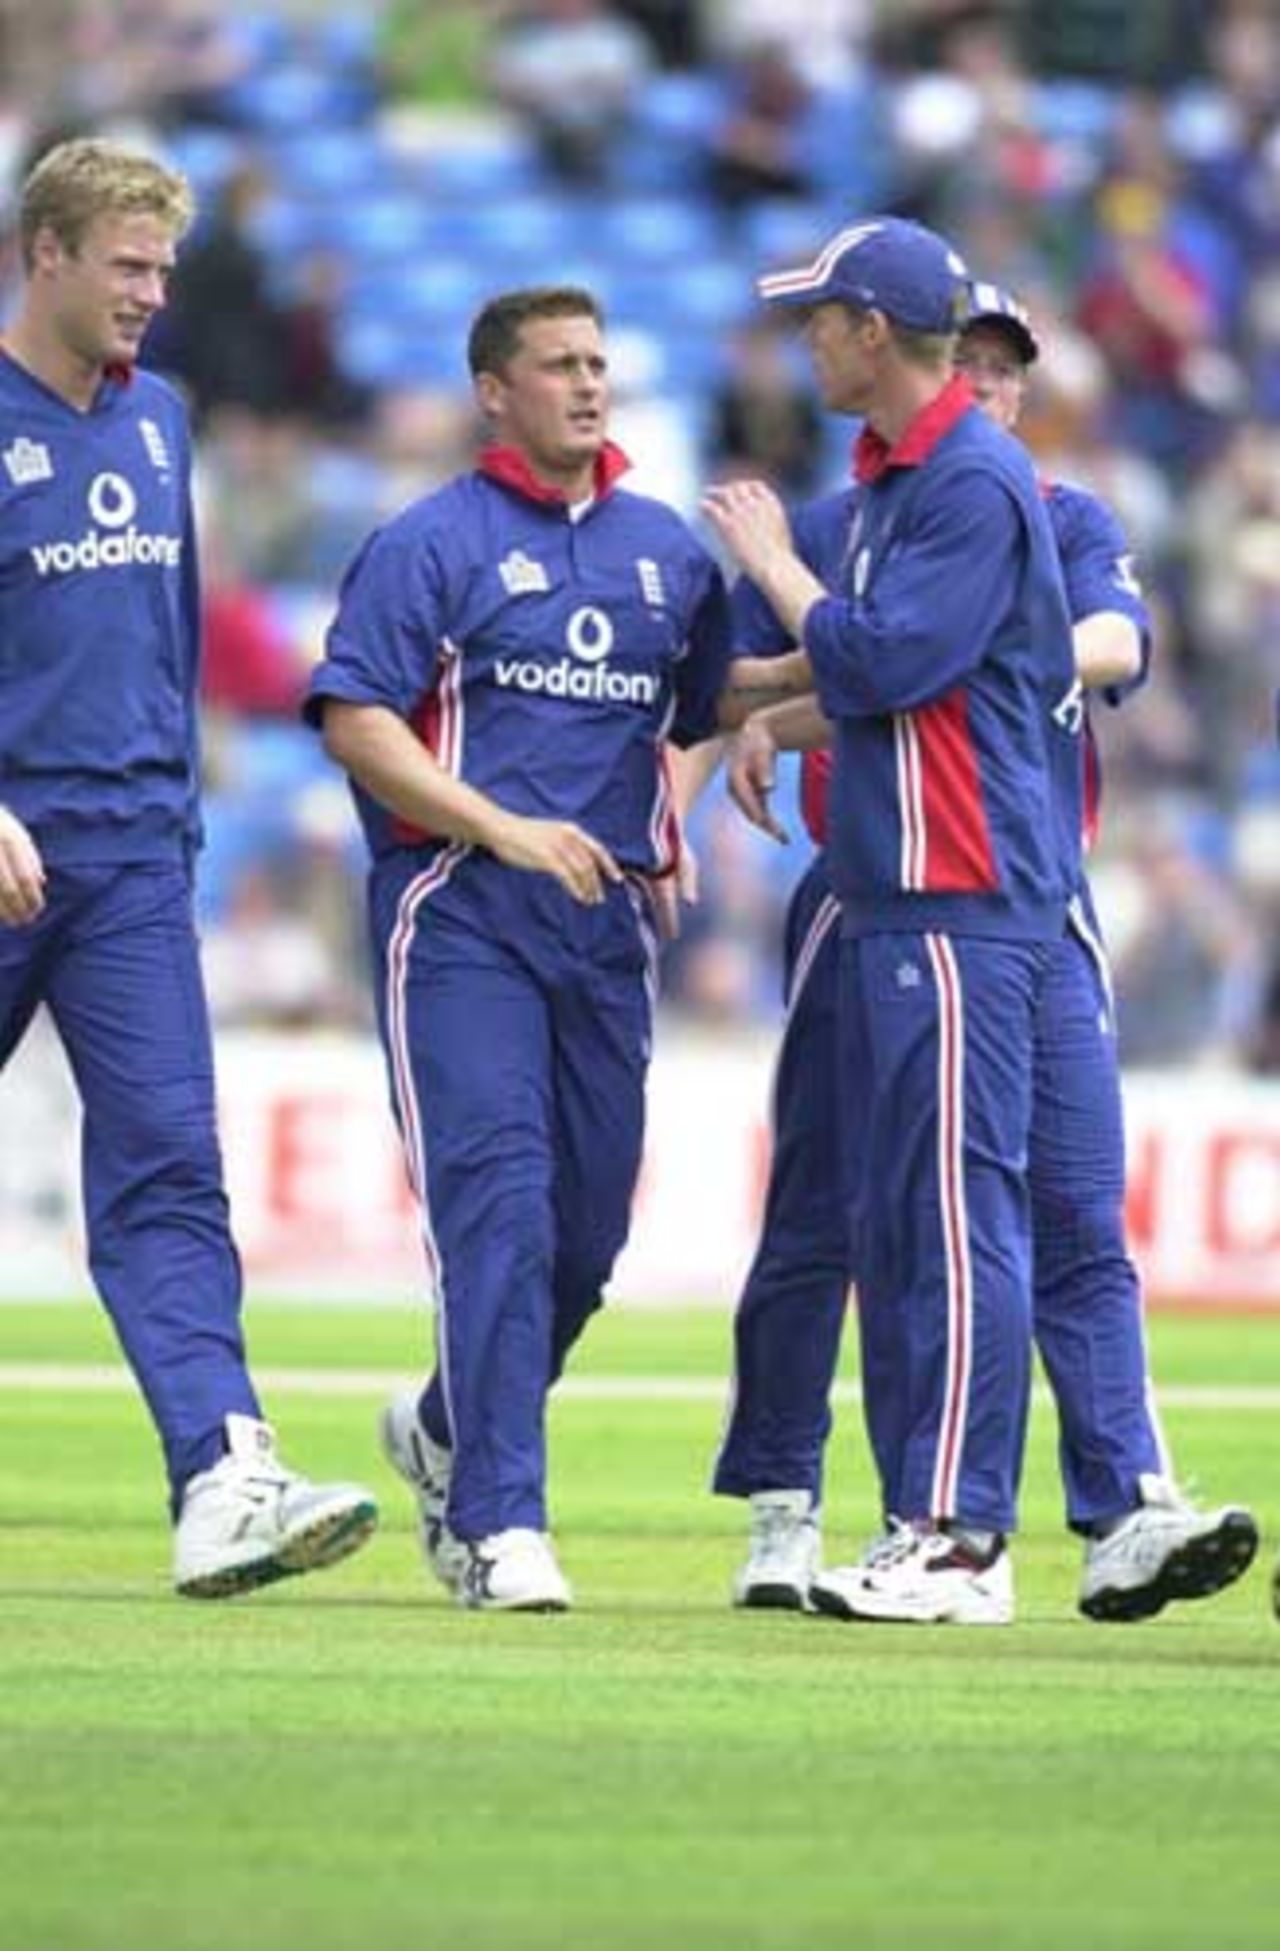 Gough takes the wicket of Kaluwitharana with the help of a catch from  Hussain ., England v Sri Lanka at Leeds, July 2002